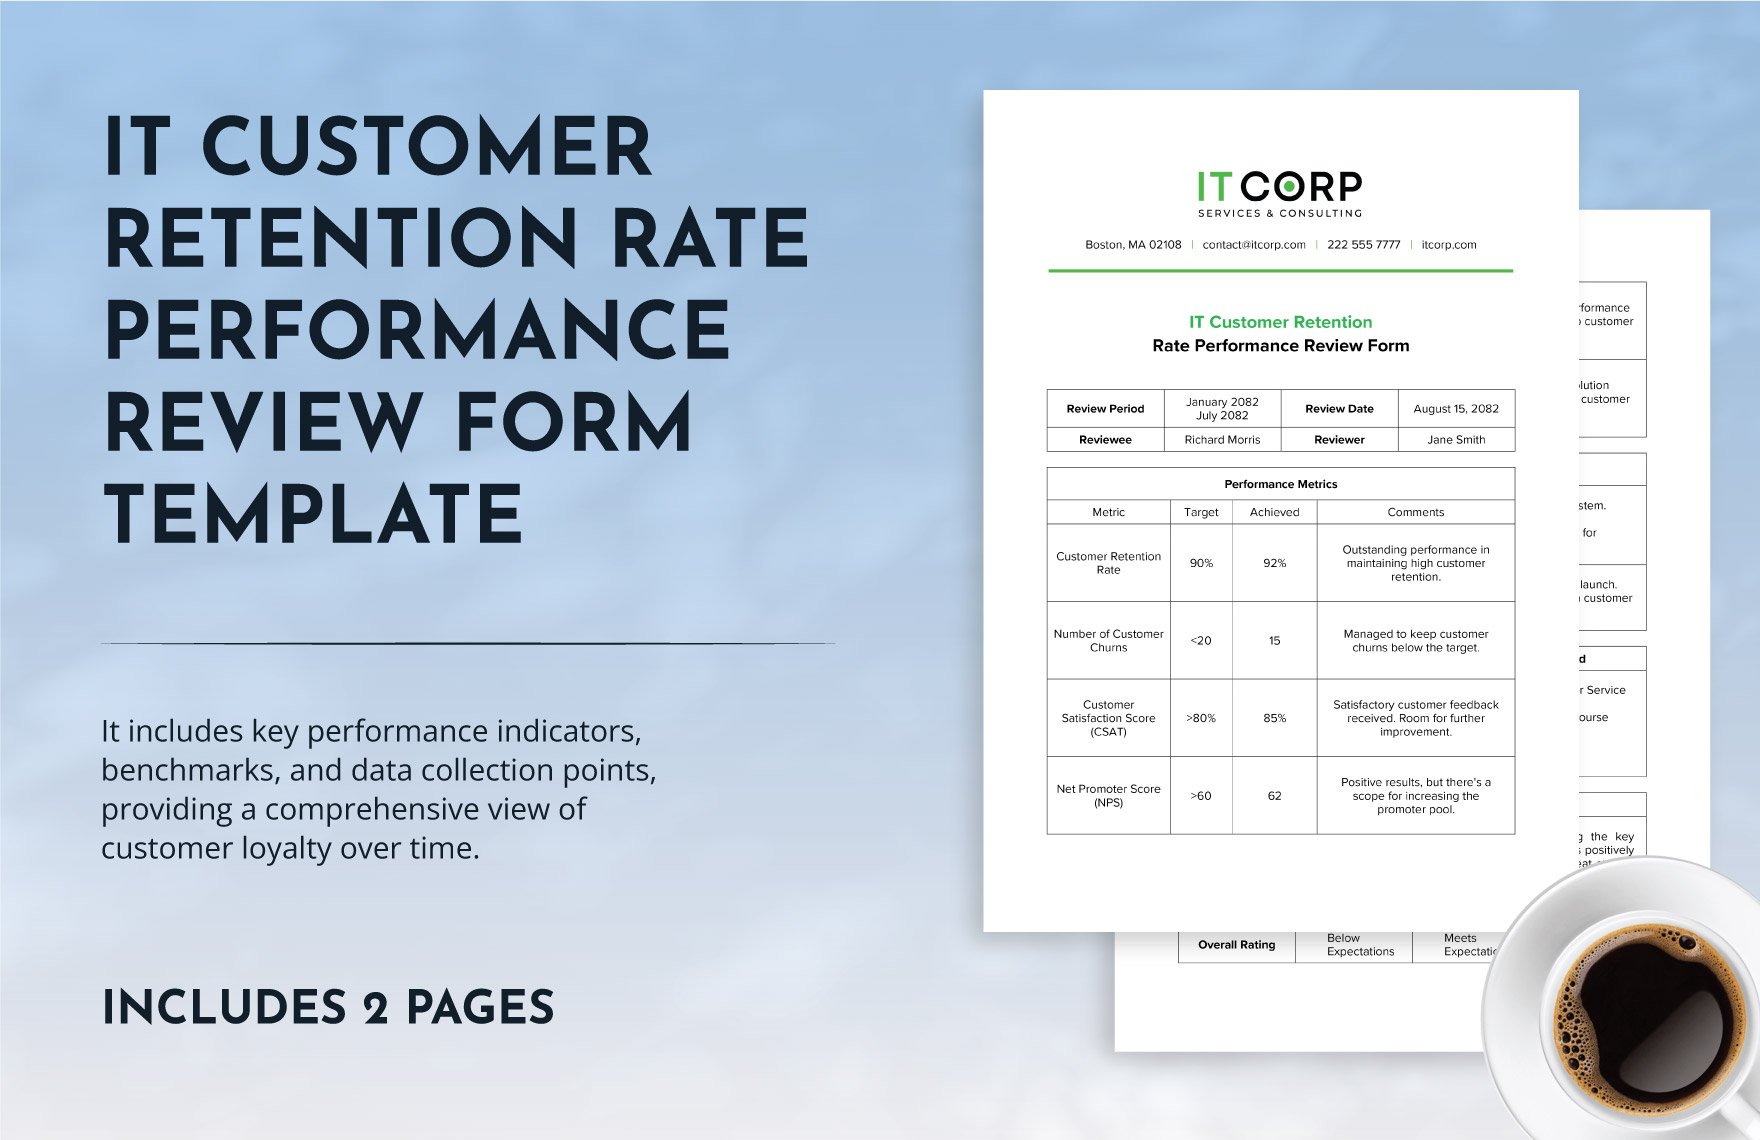 IT Customer Retention Rate Performance Review Form Template in Word, Google Docs, PDF